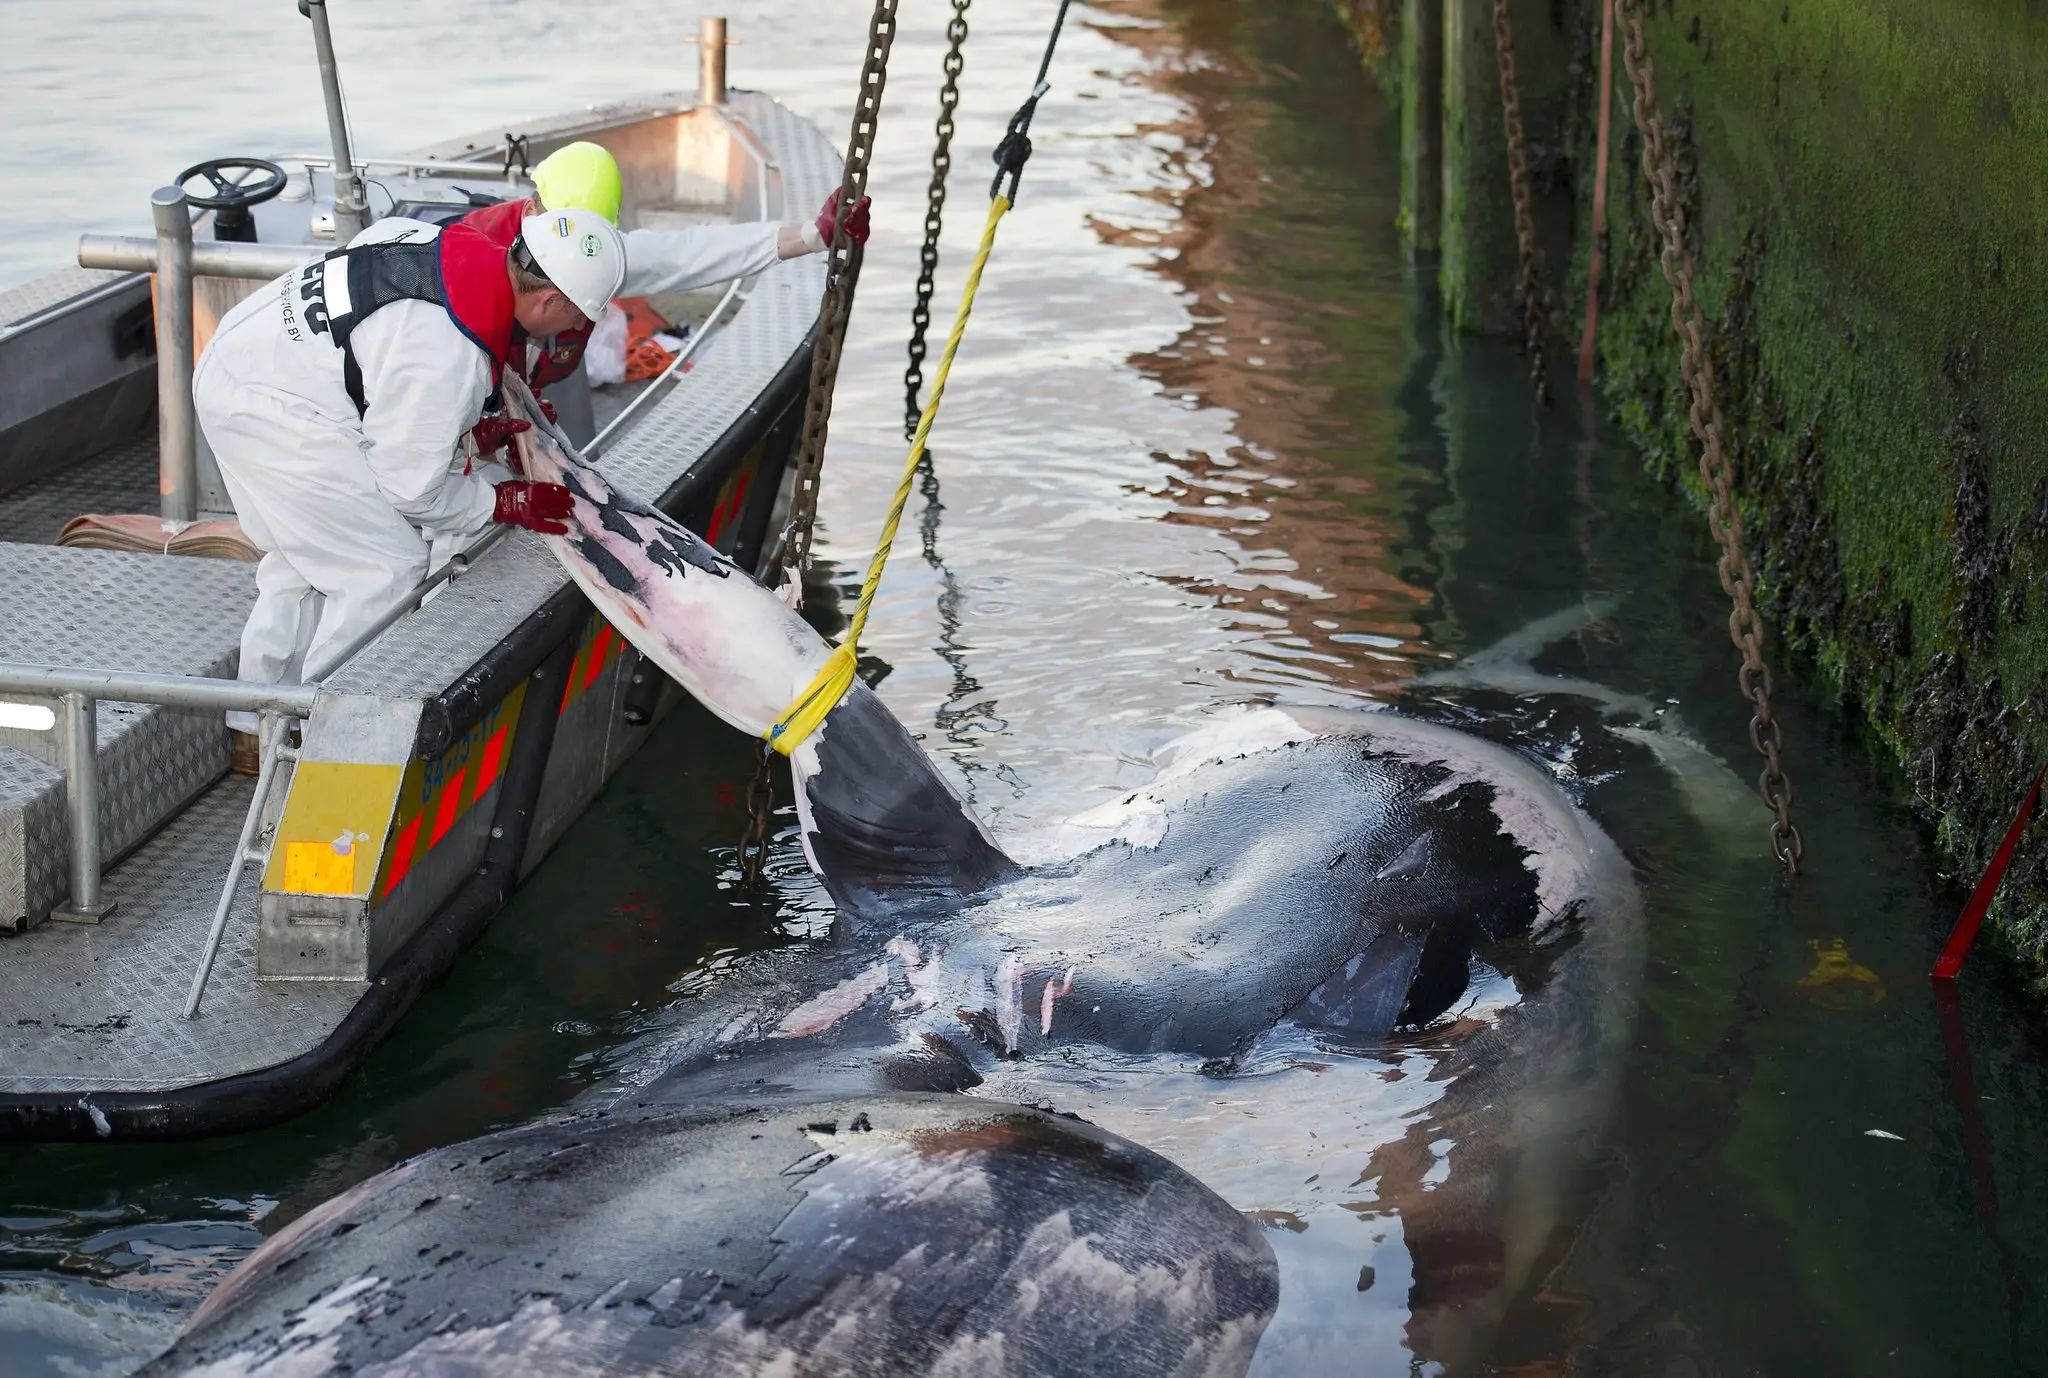 A dead whale in Rotterdam, the Netherlands, in 2011. As container ships multiply, more whales are being harmed, a study said. | Credit...Marco De Swart/Agence France-Presse — Getty Images